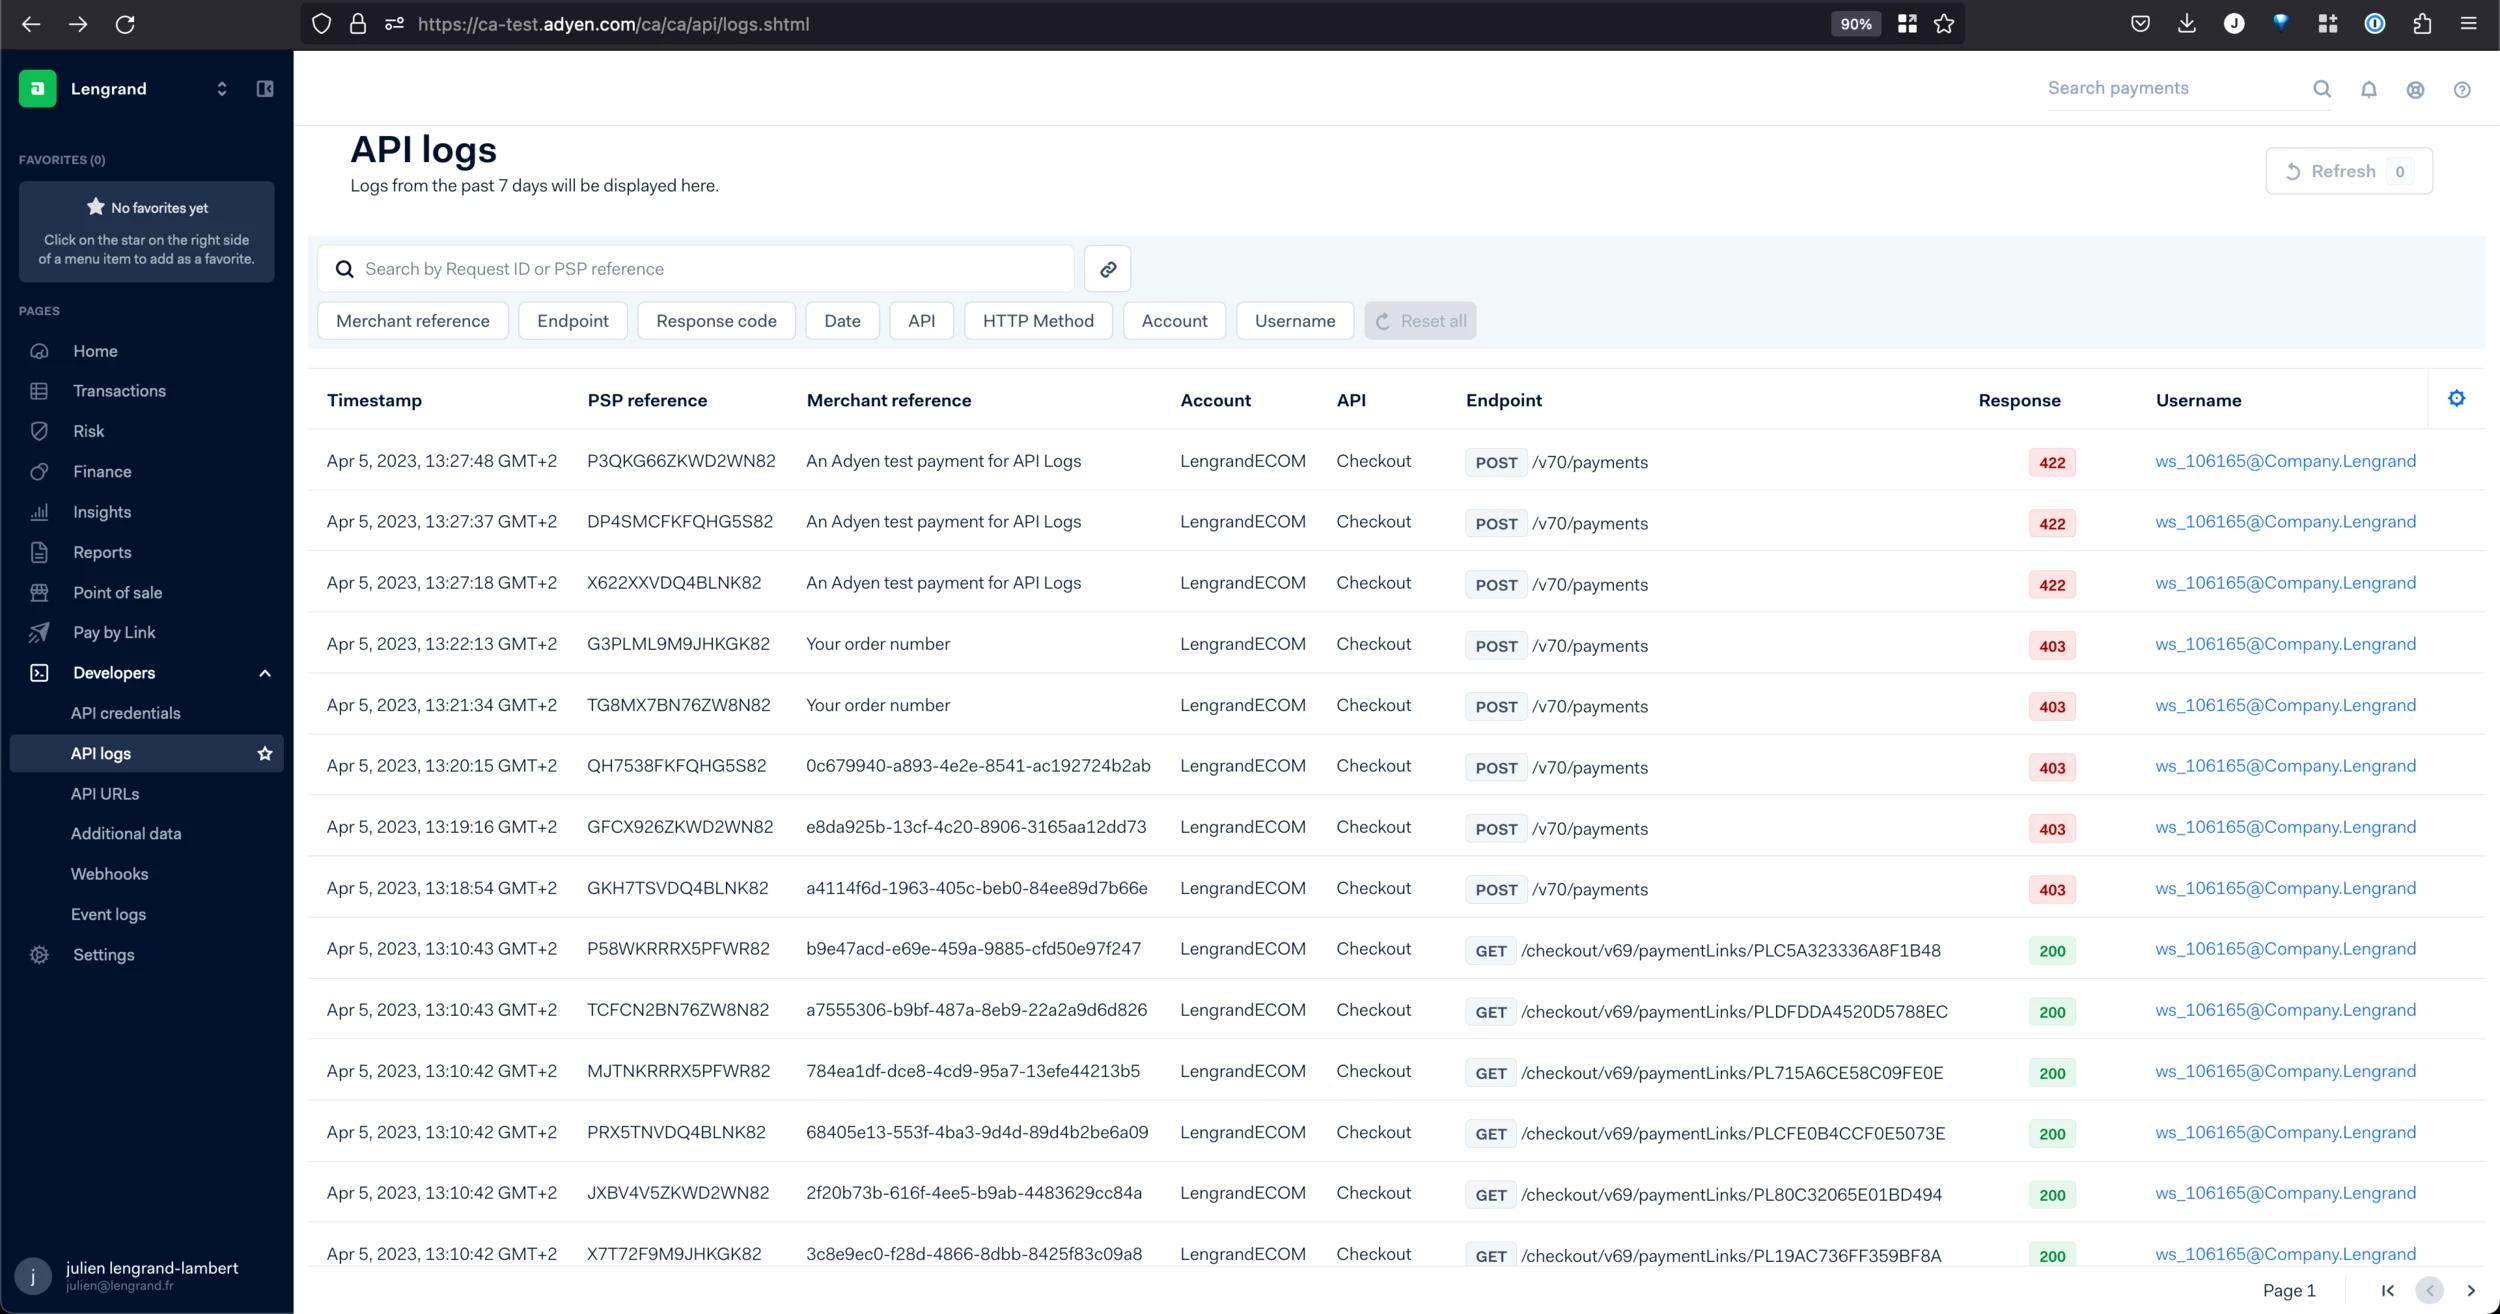 The API logs view of the customer area